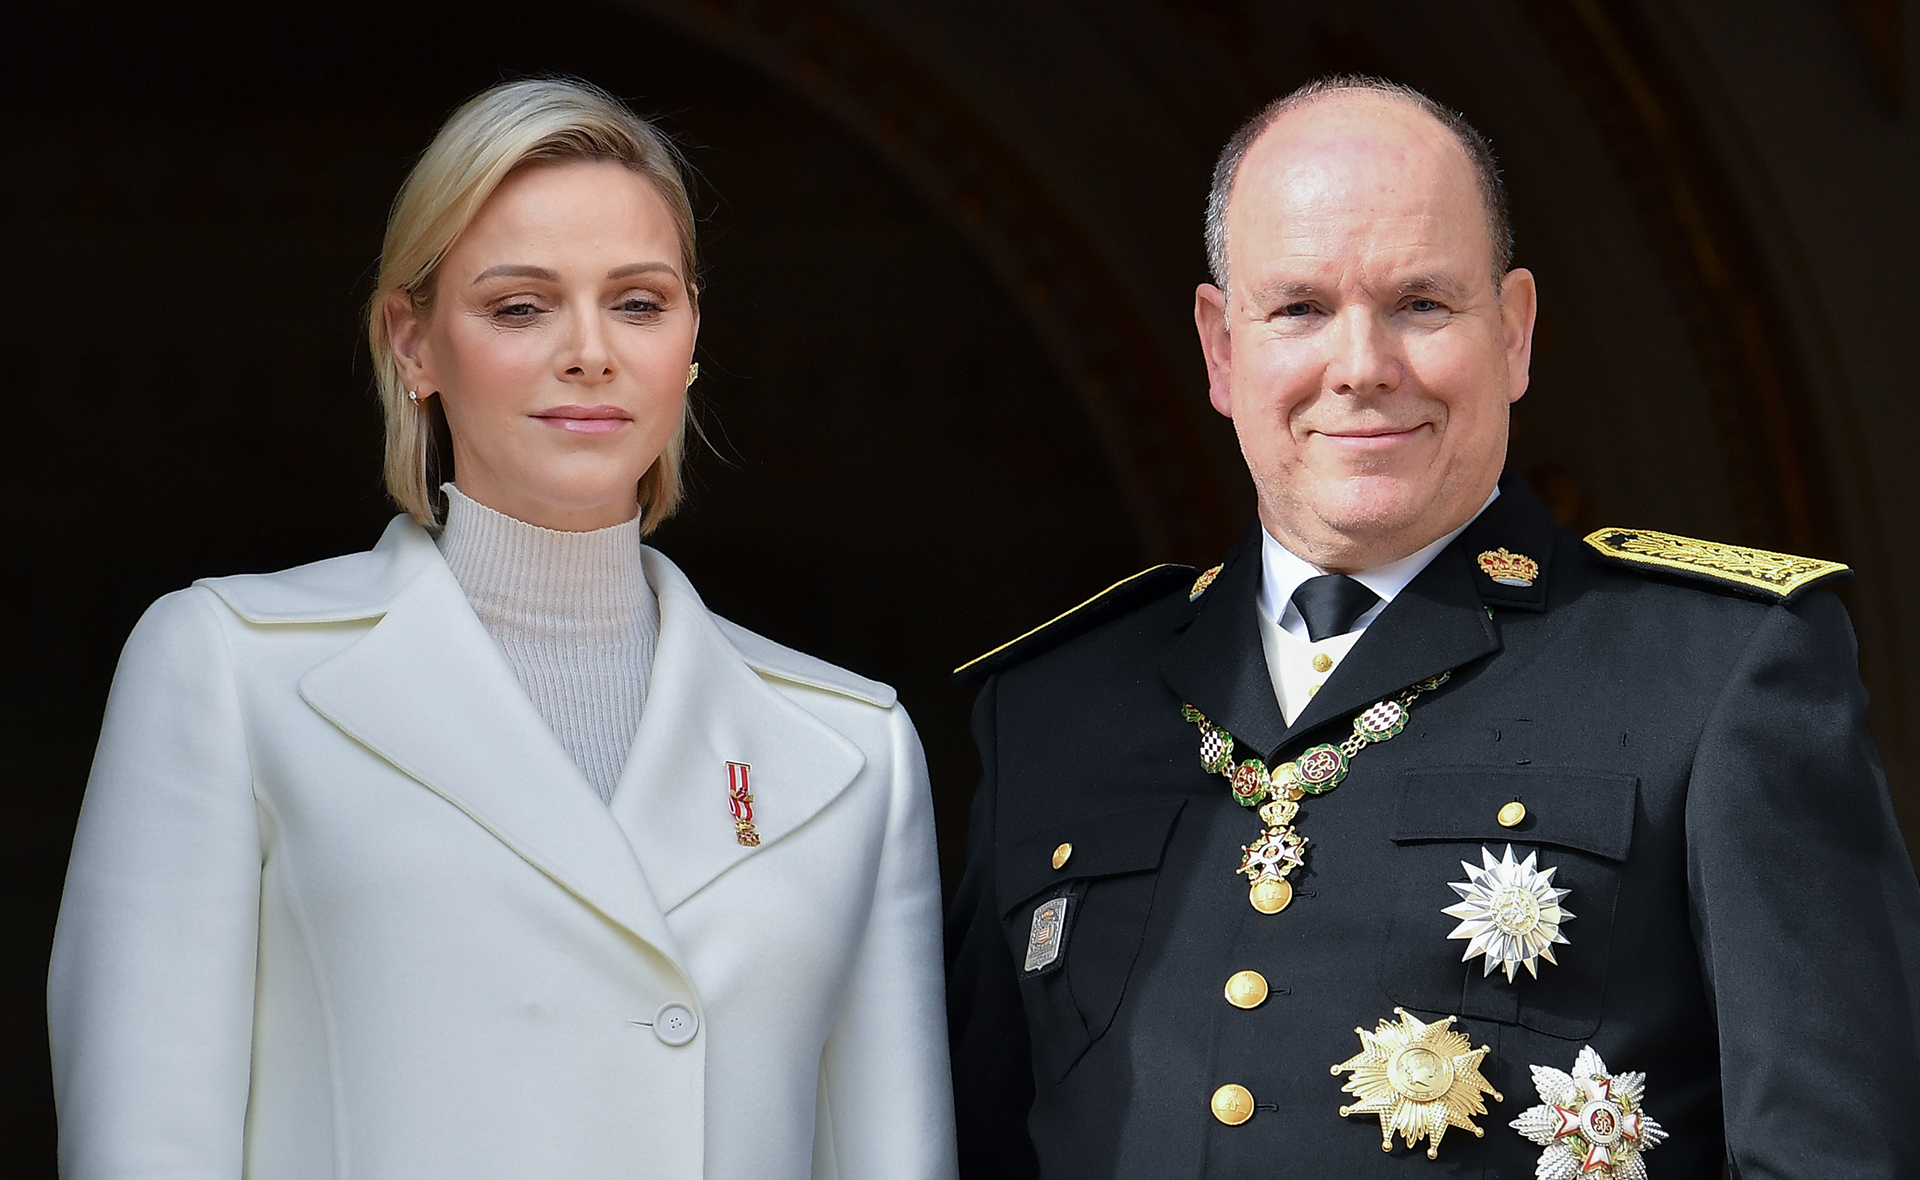 Is Princess Charlene about to return to Monaco after her “final” operation and months stranded in South Africa?